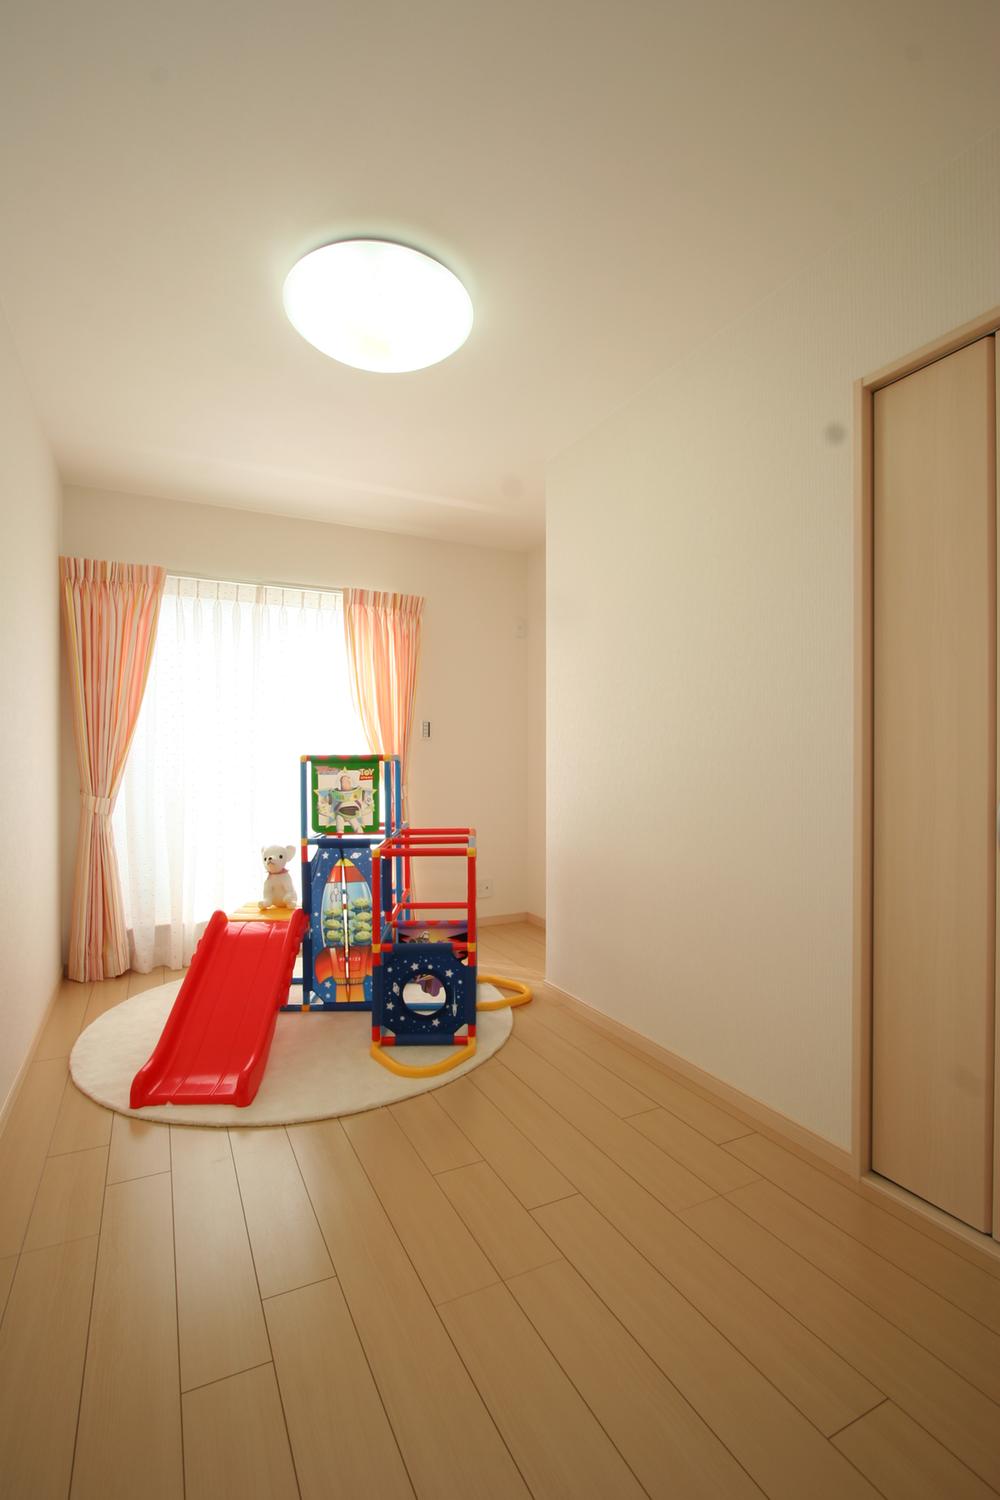 Same specifications photos (Other introspection). Our construction cases Kids Room